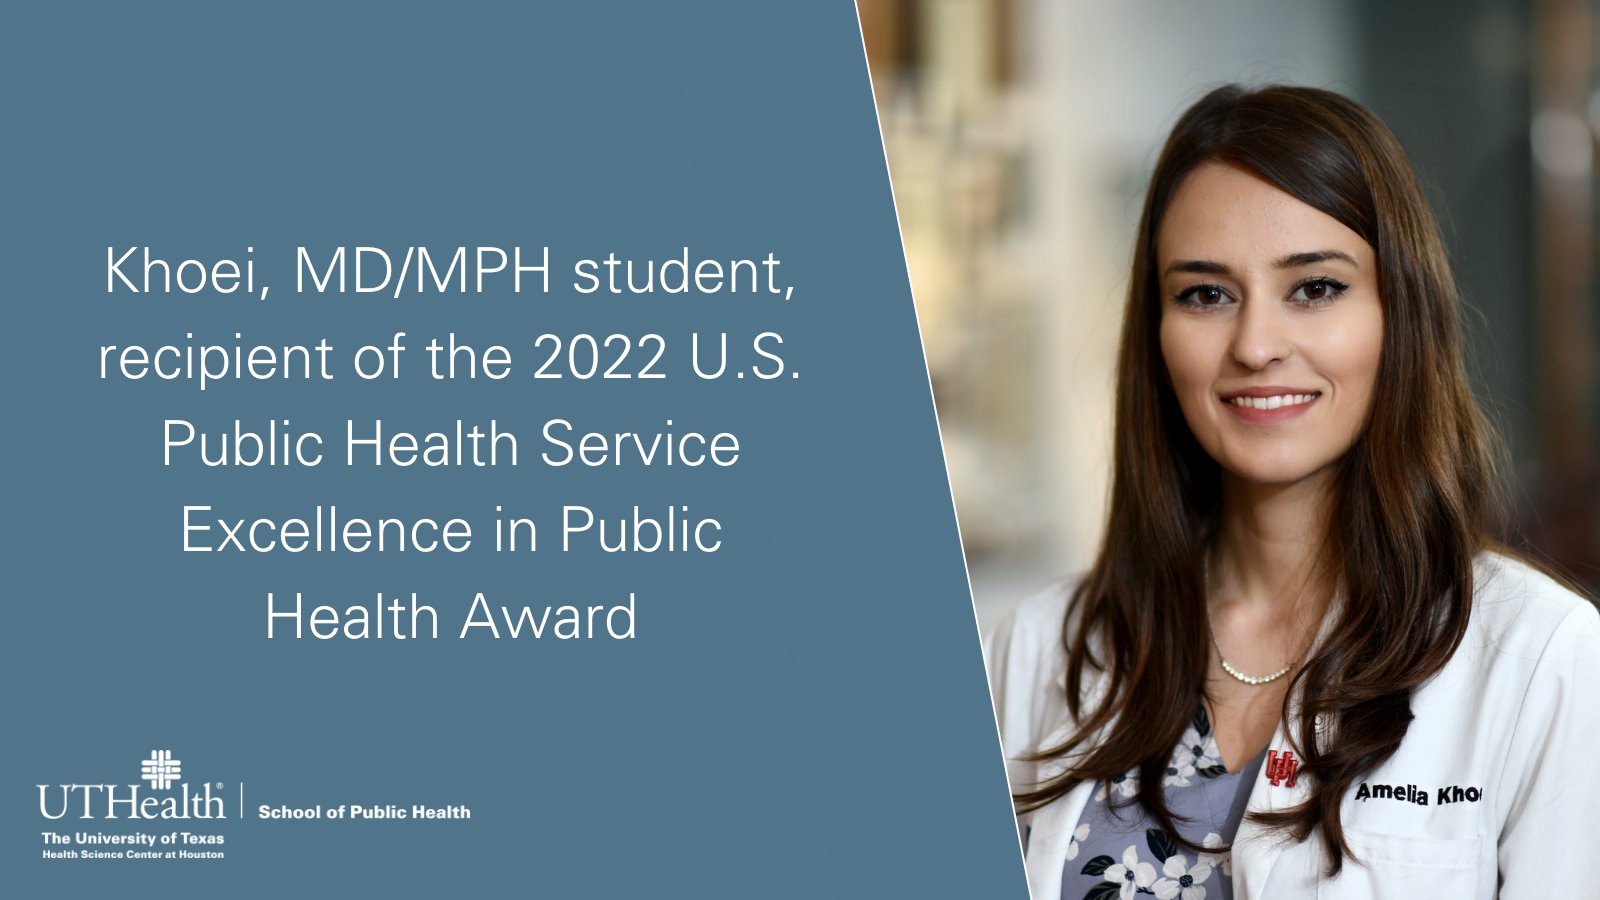 Khoei, MD/MPH student, is the recipient of the 2022 U.S. Public Health Service Excellence in Public Health Award